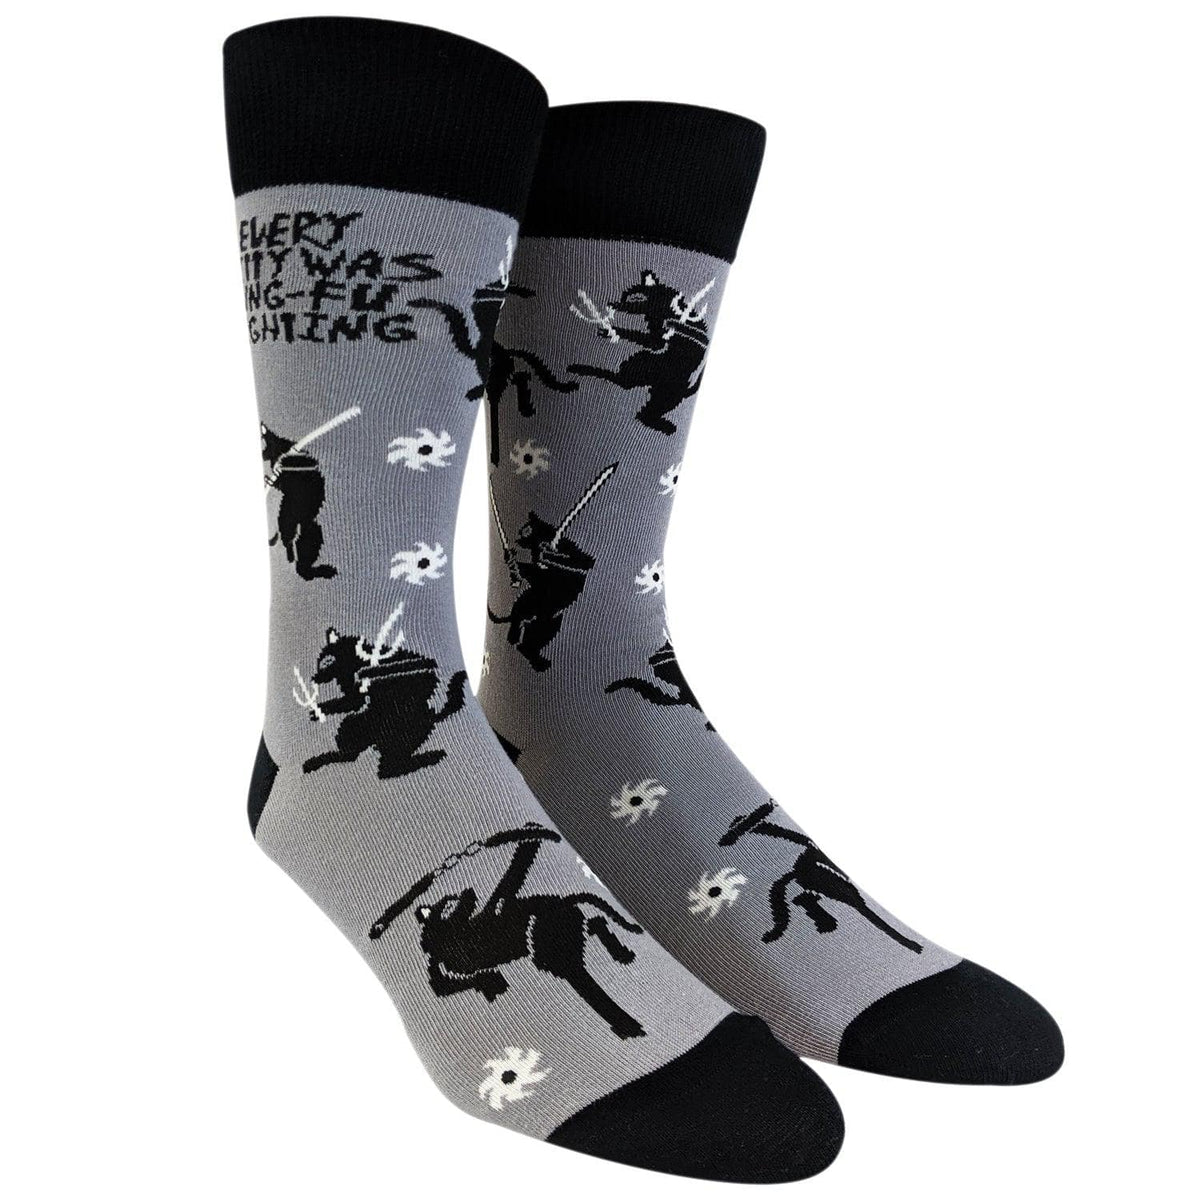 Mens Every Kitty Was Kung-Fu Fighting Socks  -  Crazy Dog T-Shirts